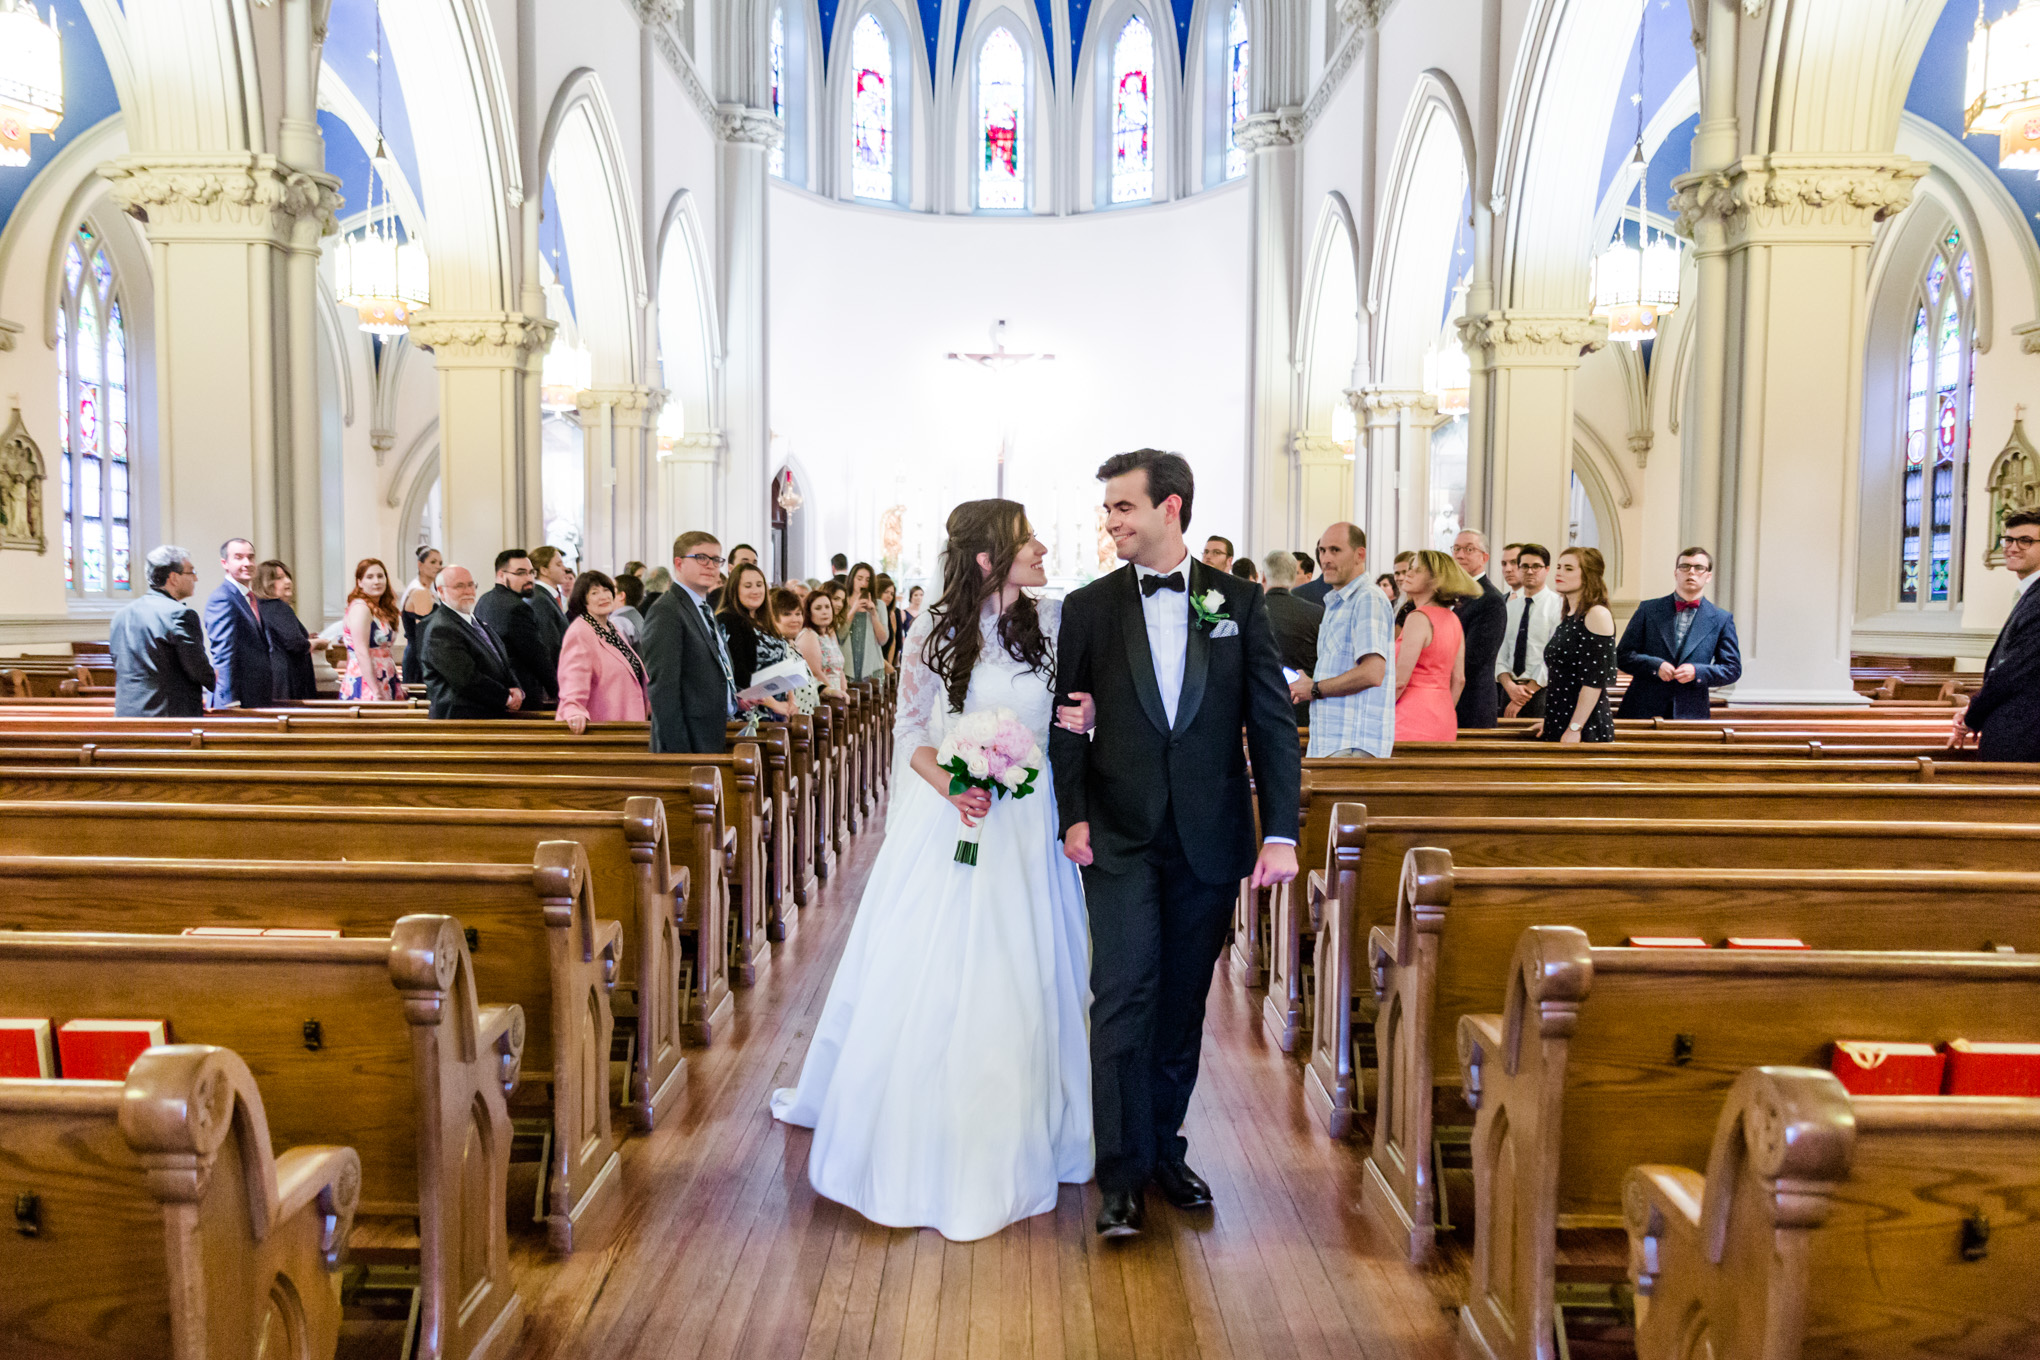 your wedding photography investment, wedding photography, wedding planning, wedding photography planning, photography investment, St. Joseph's Catholic Church, D.C. wedding, church wedding, D.C. bride, D.C. couple, Capitol Hill wedding